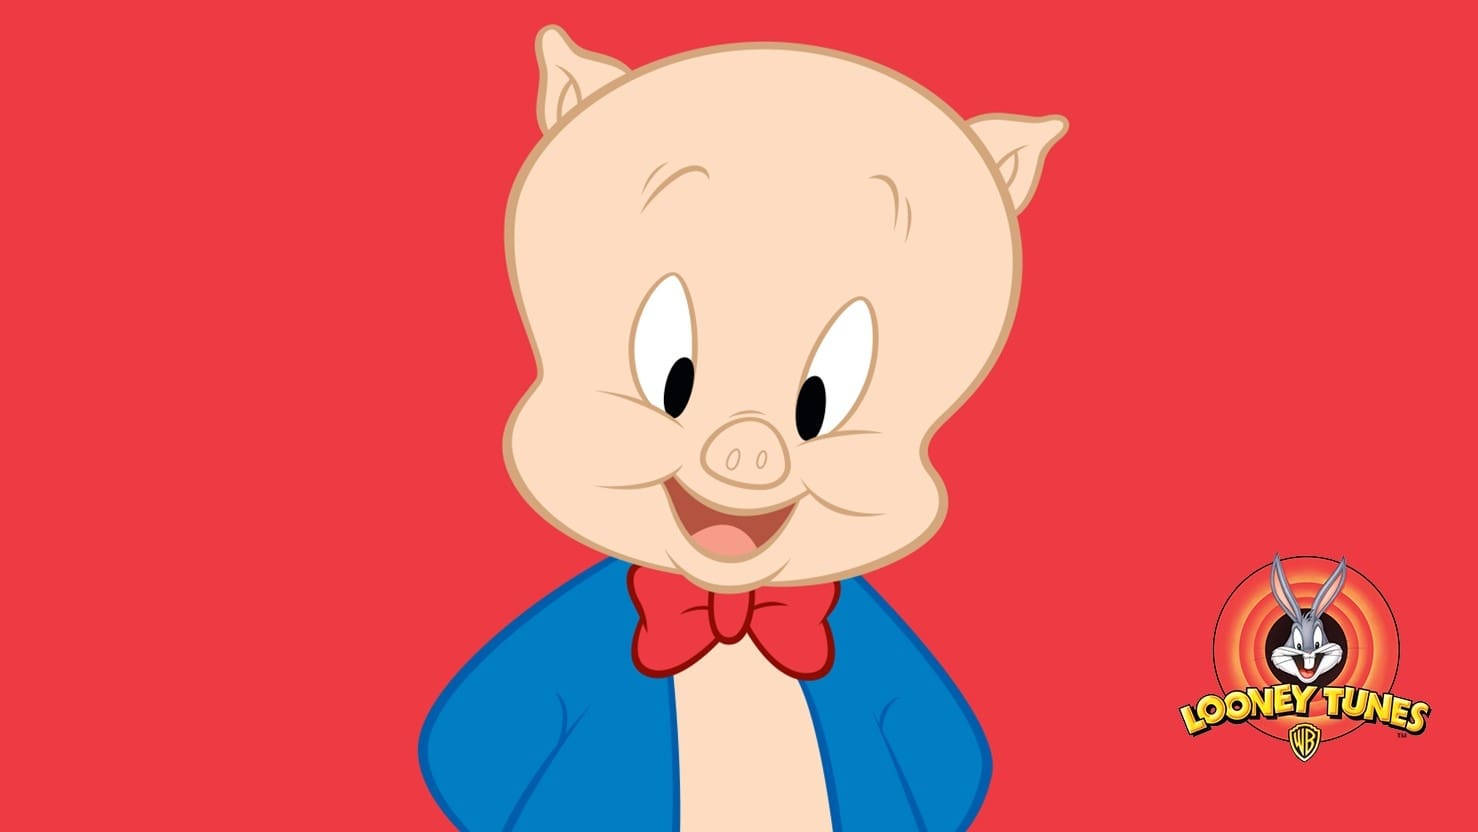 Porky Pig Solo Red Poster Wallpaper